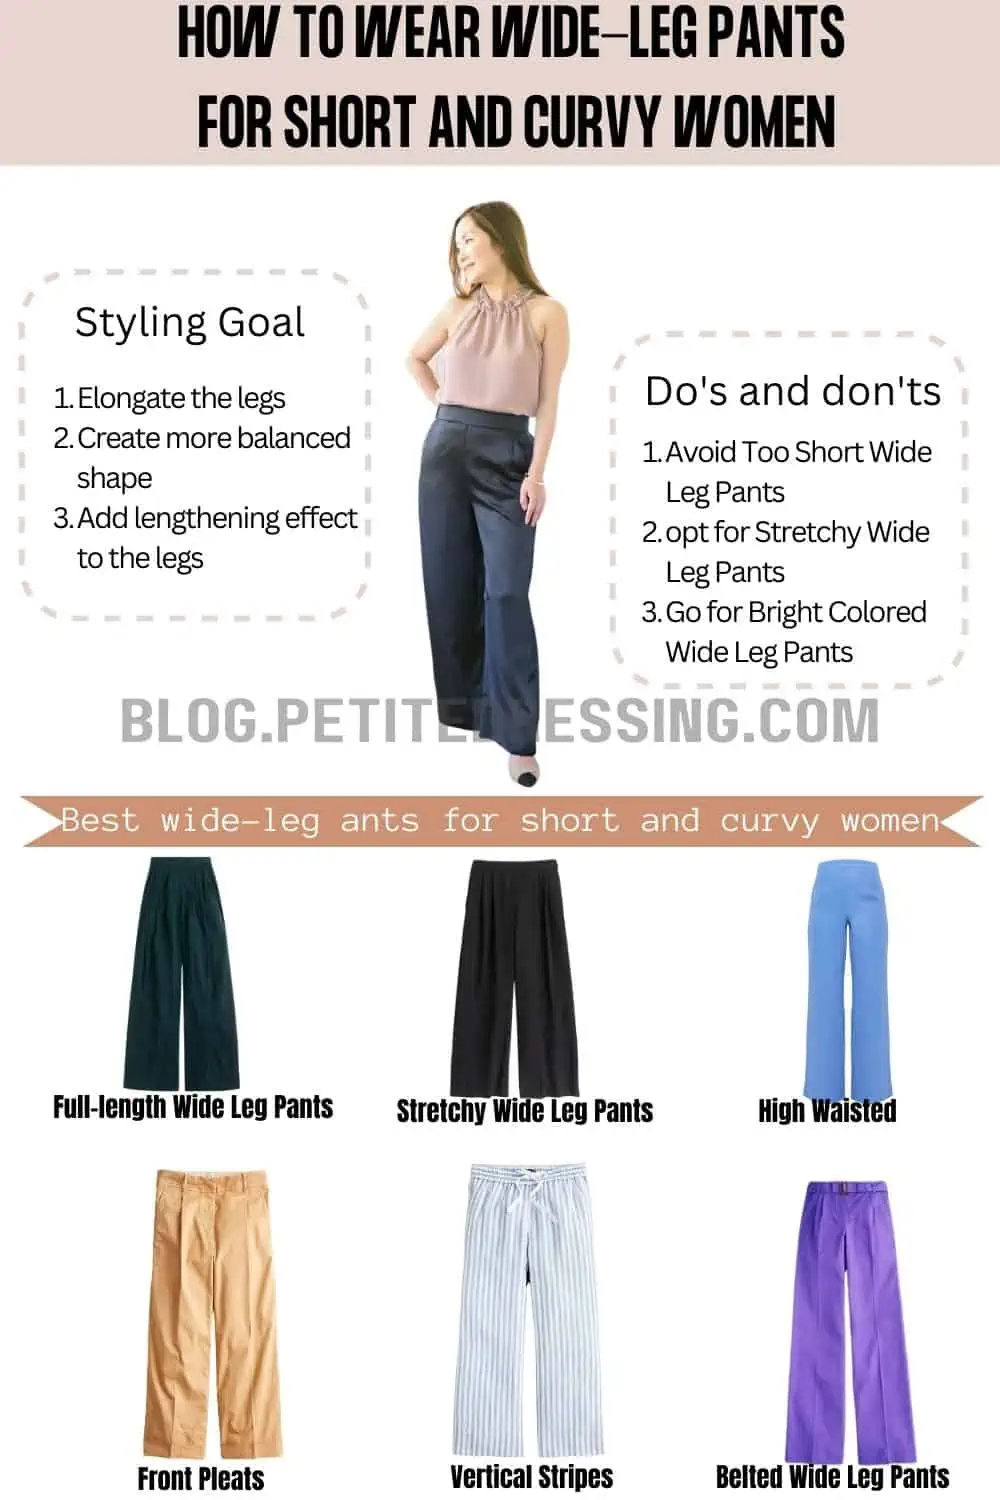 The Wide Leg Pants Guide for Short and Curvy Women - Petite Dressing